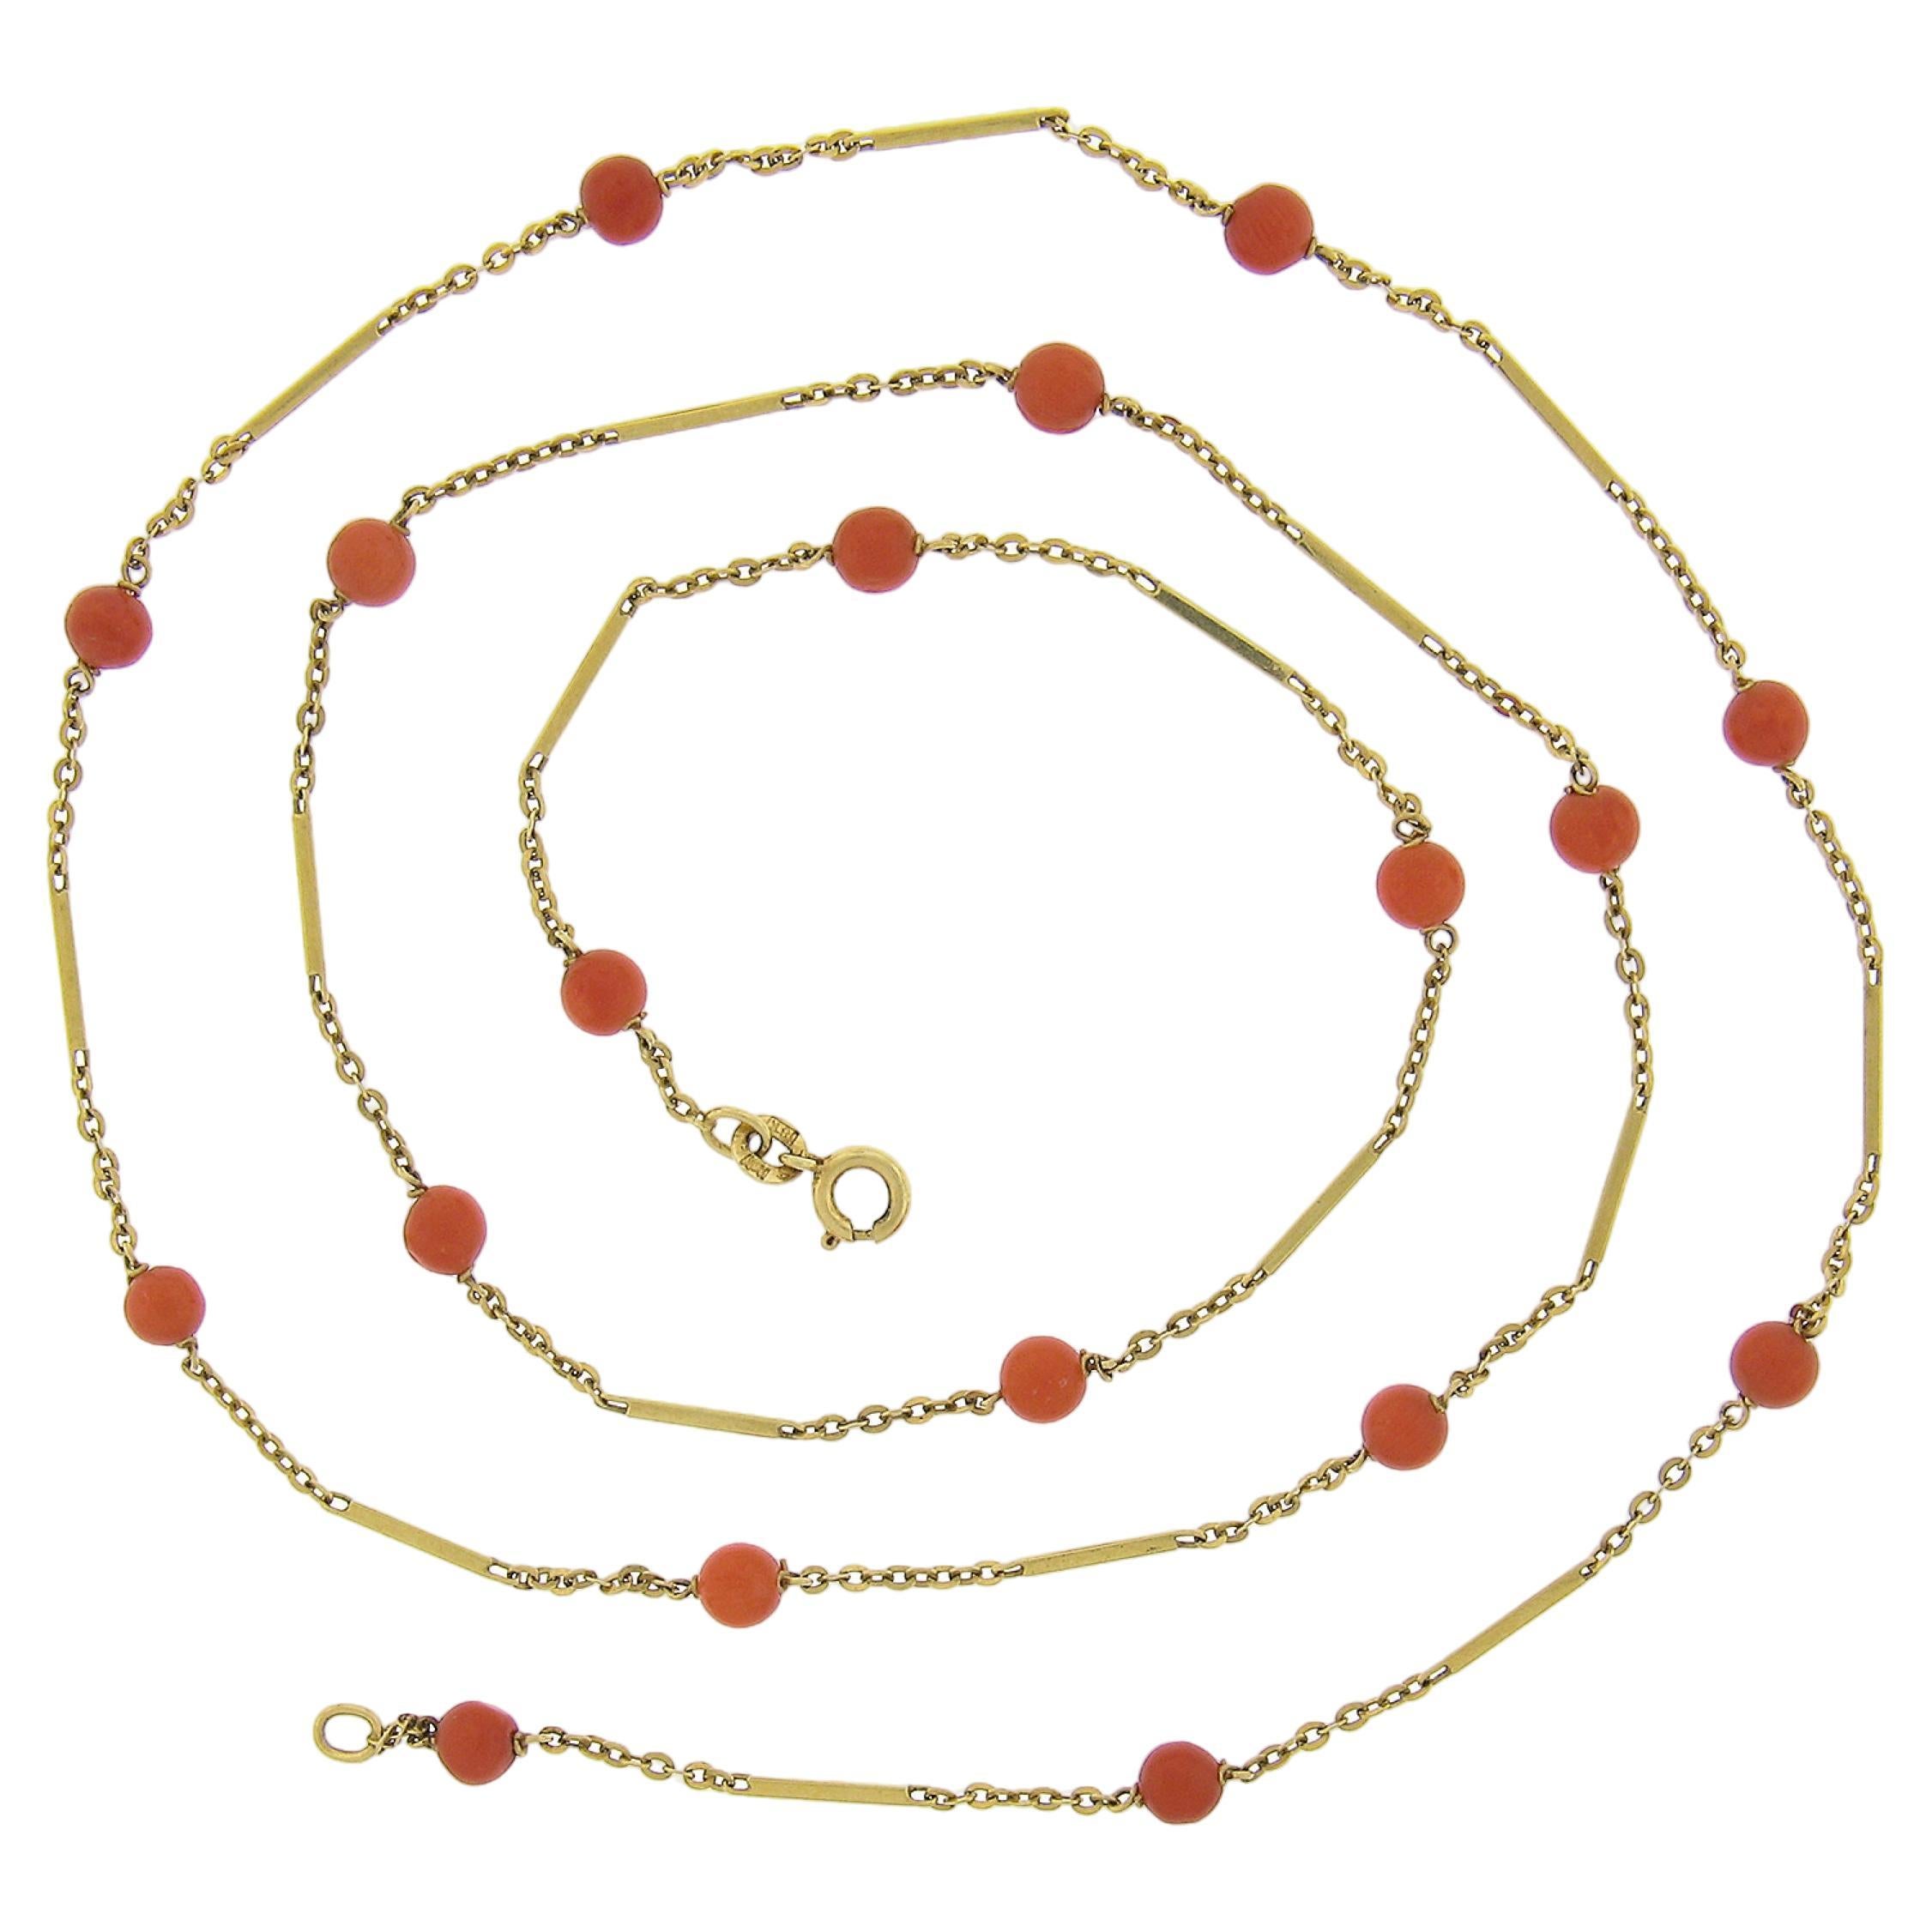 Vintage 18k Yellow Gold Coral Bead w/ Bar & Cable Link 30" Long Station Necklace en vente